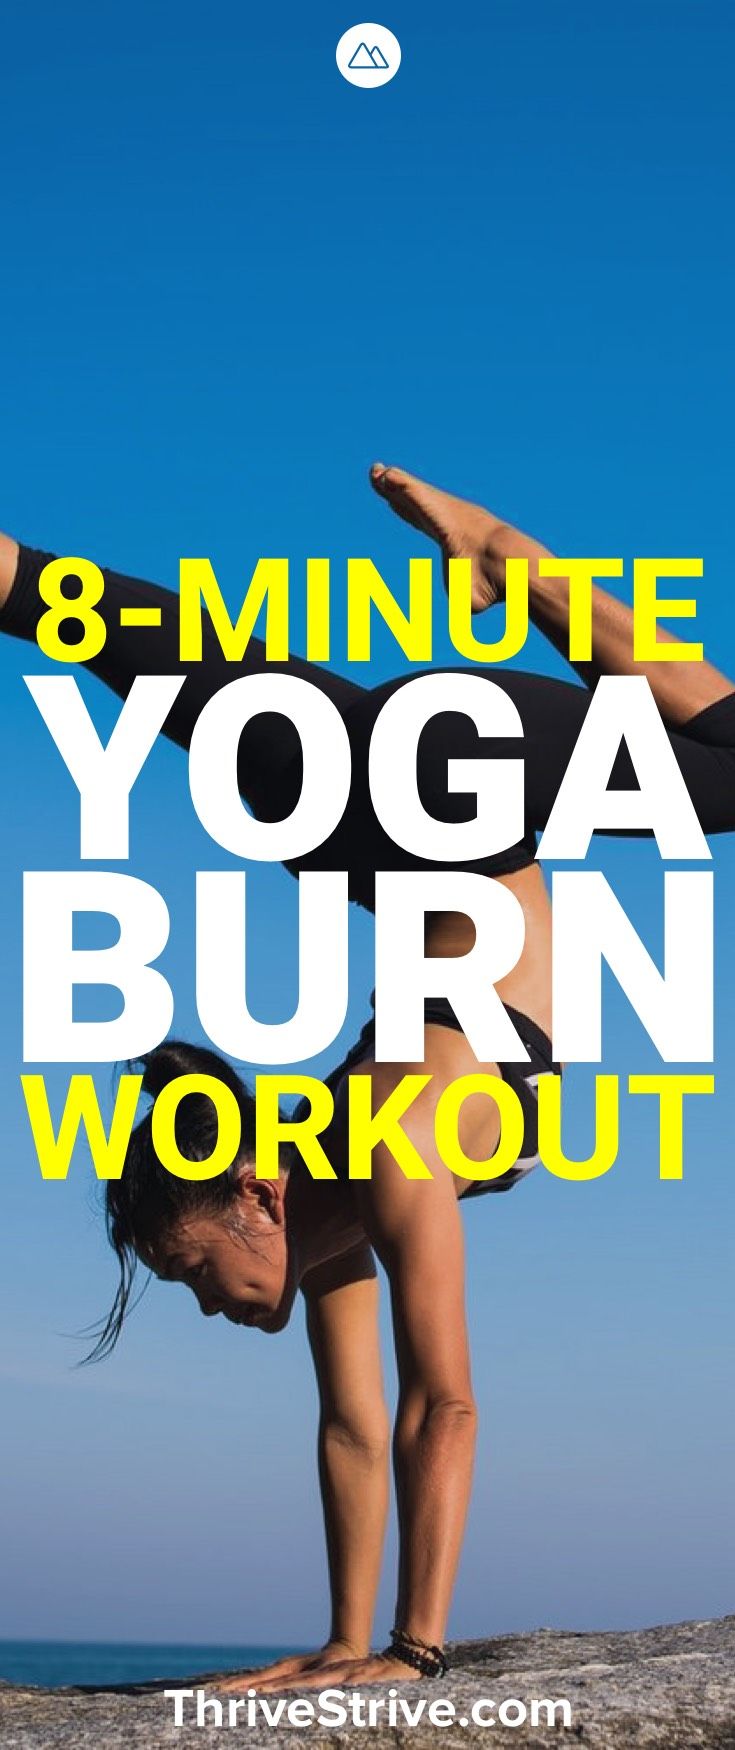 Yoga sessions don't have to be 30 minutes long to feel productive. This 8-mi...